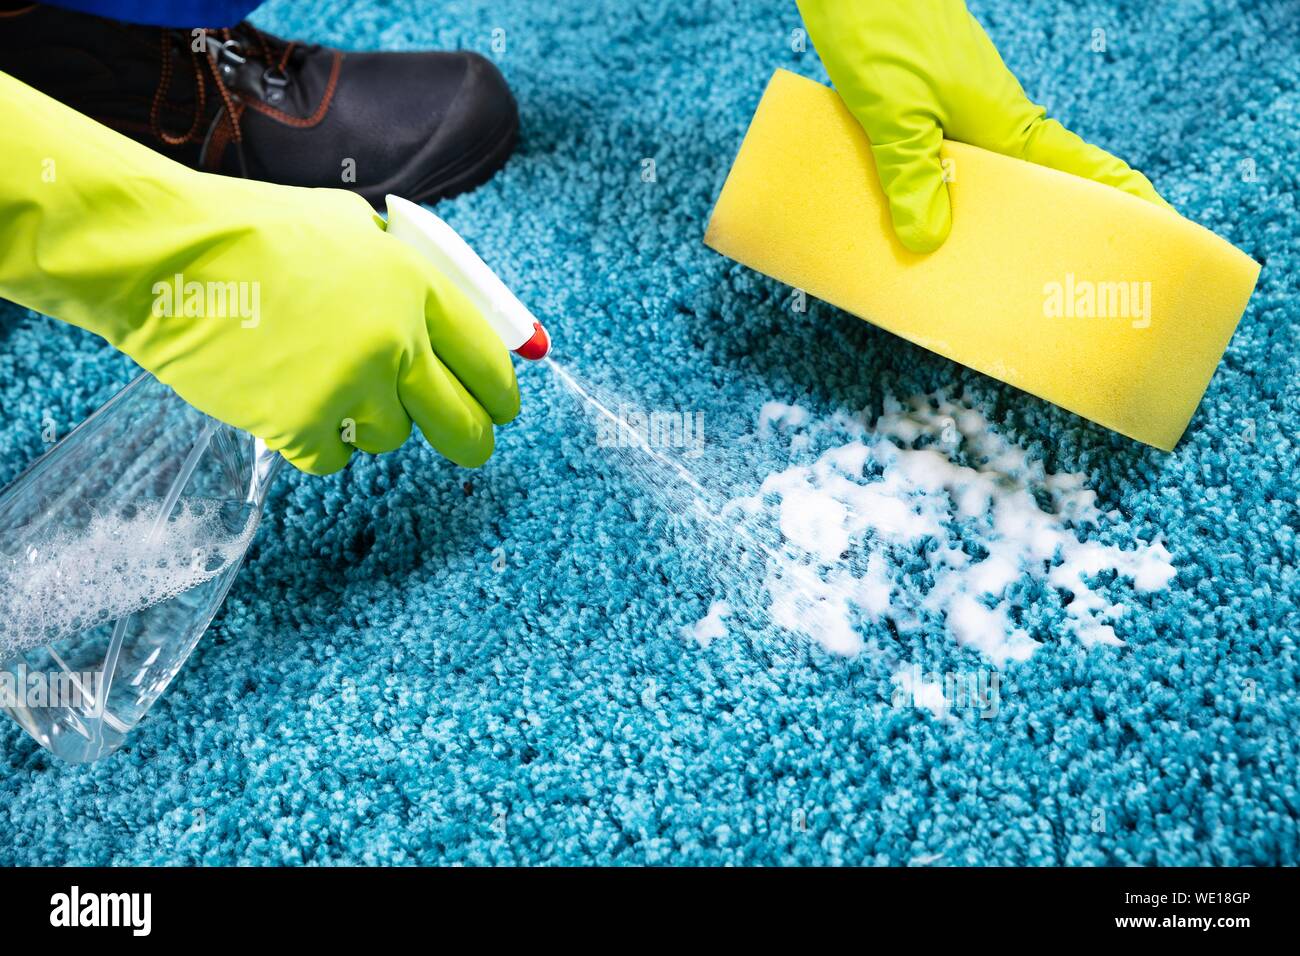 Cropped Hands Cleaning Rug With Soap Foam At Home Stock Photo